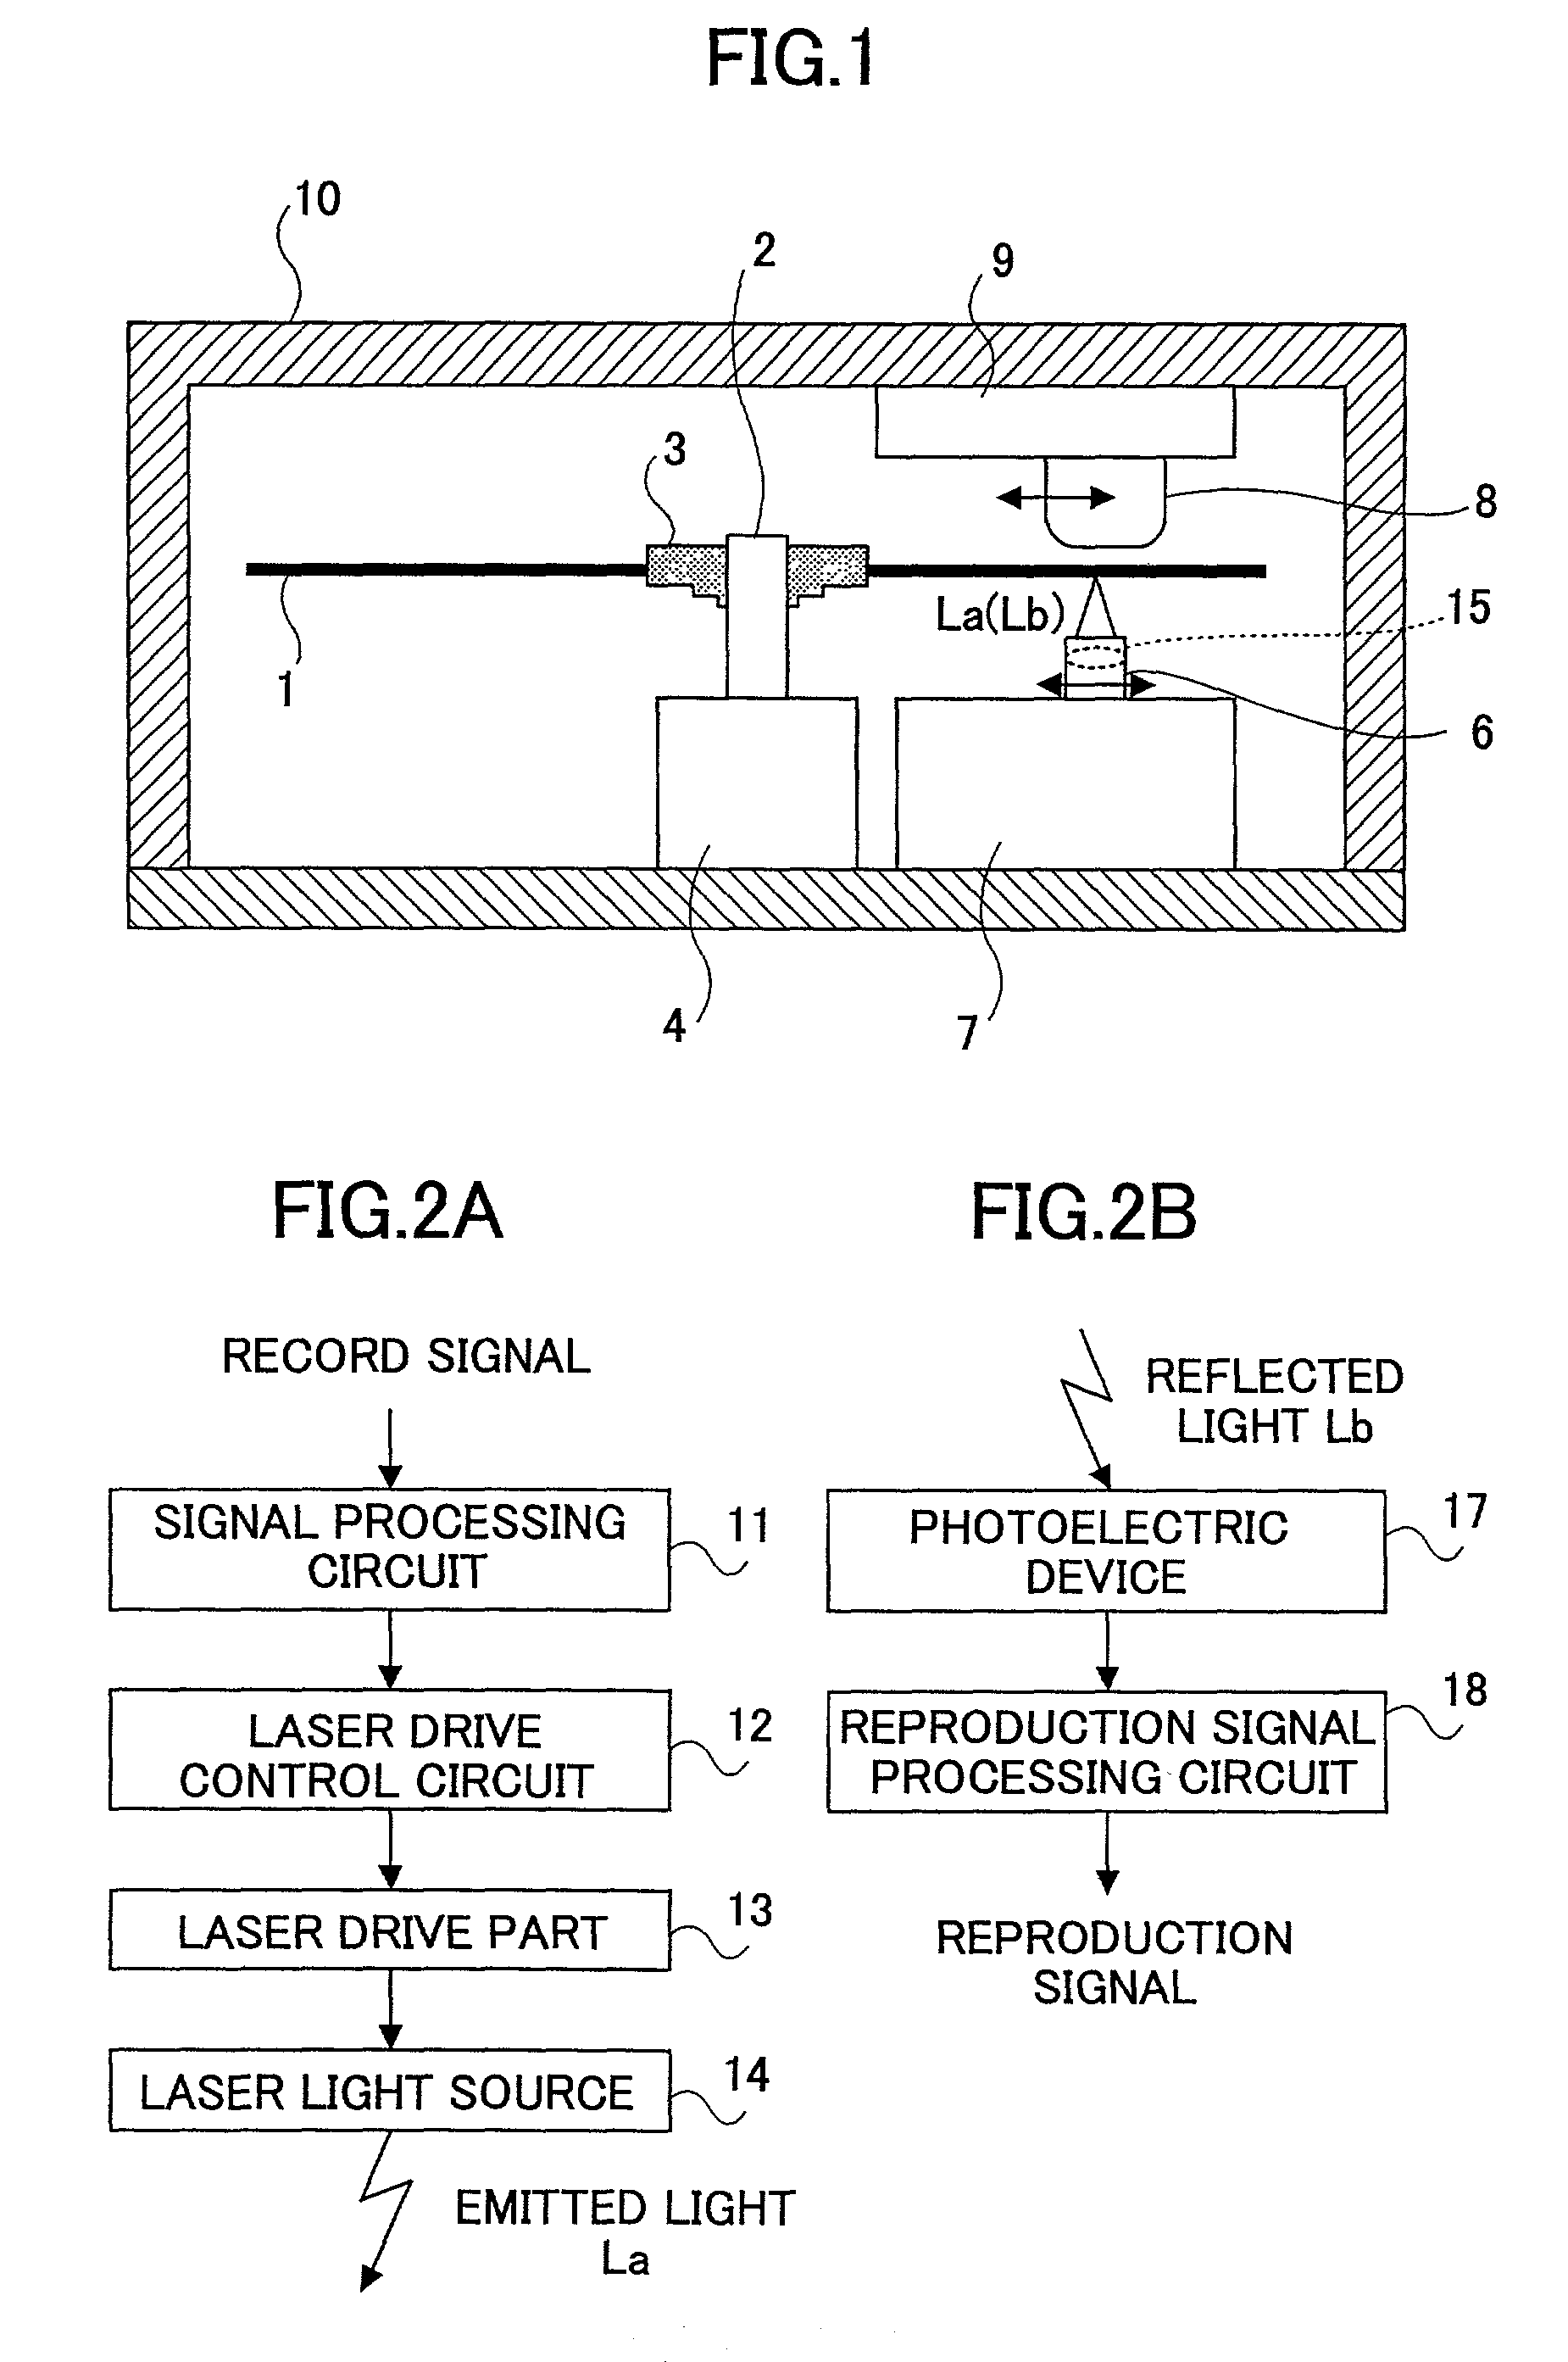 Disk drive system employing effective disk surface stabilization mechanism